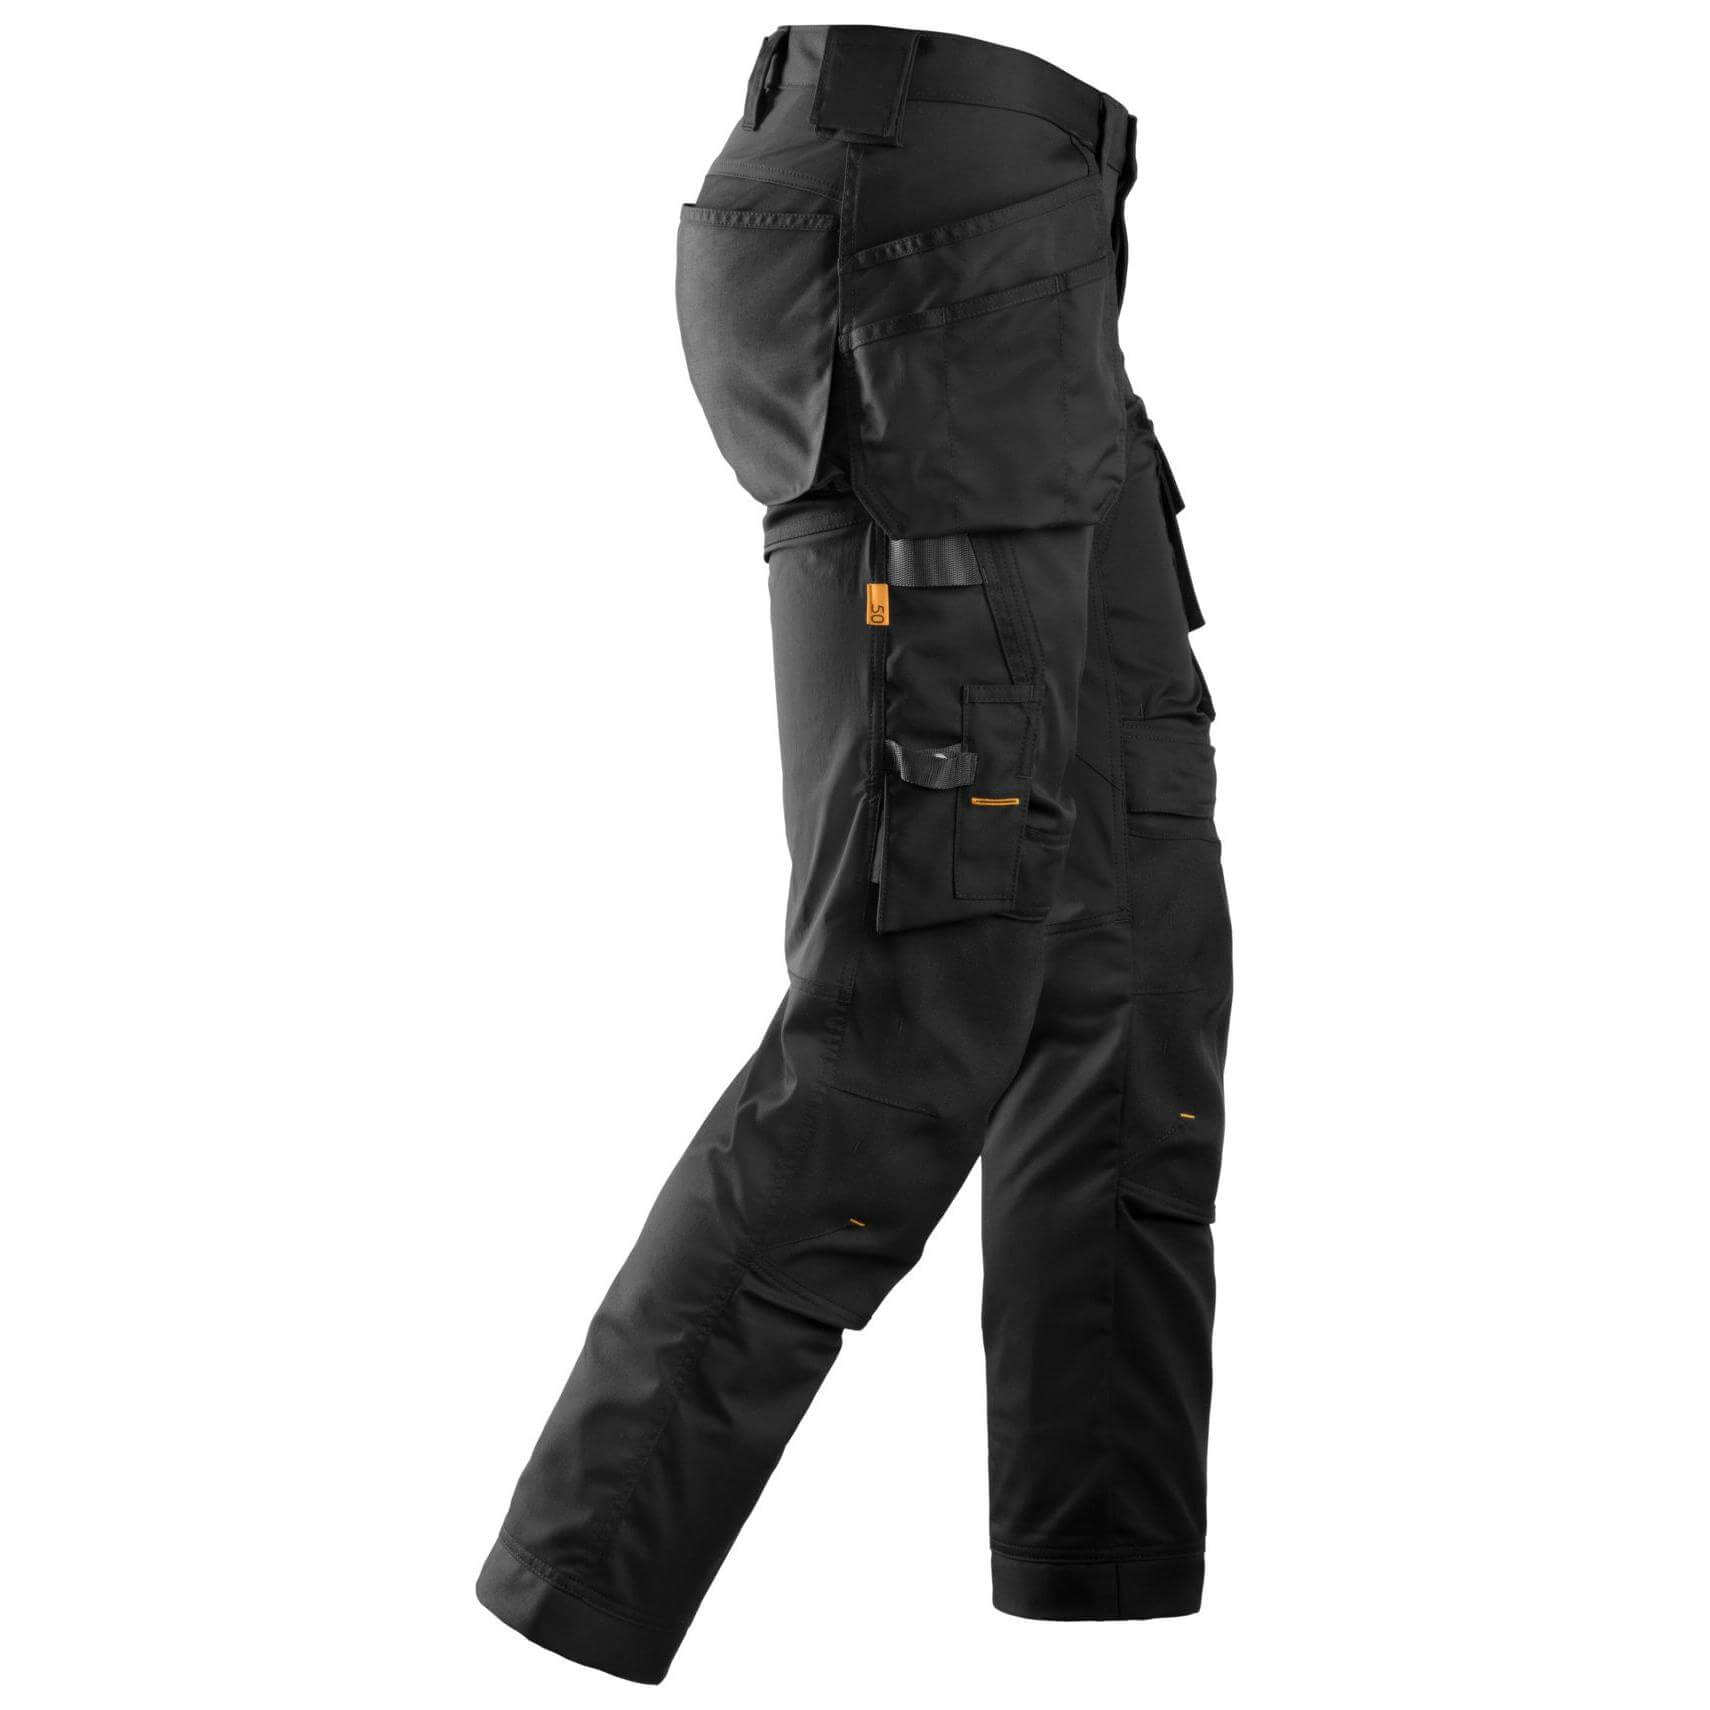 SNICKERS Workwear Review - Top Gear for Builders 